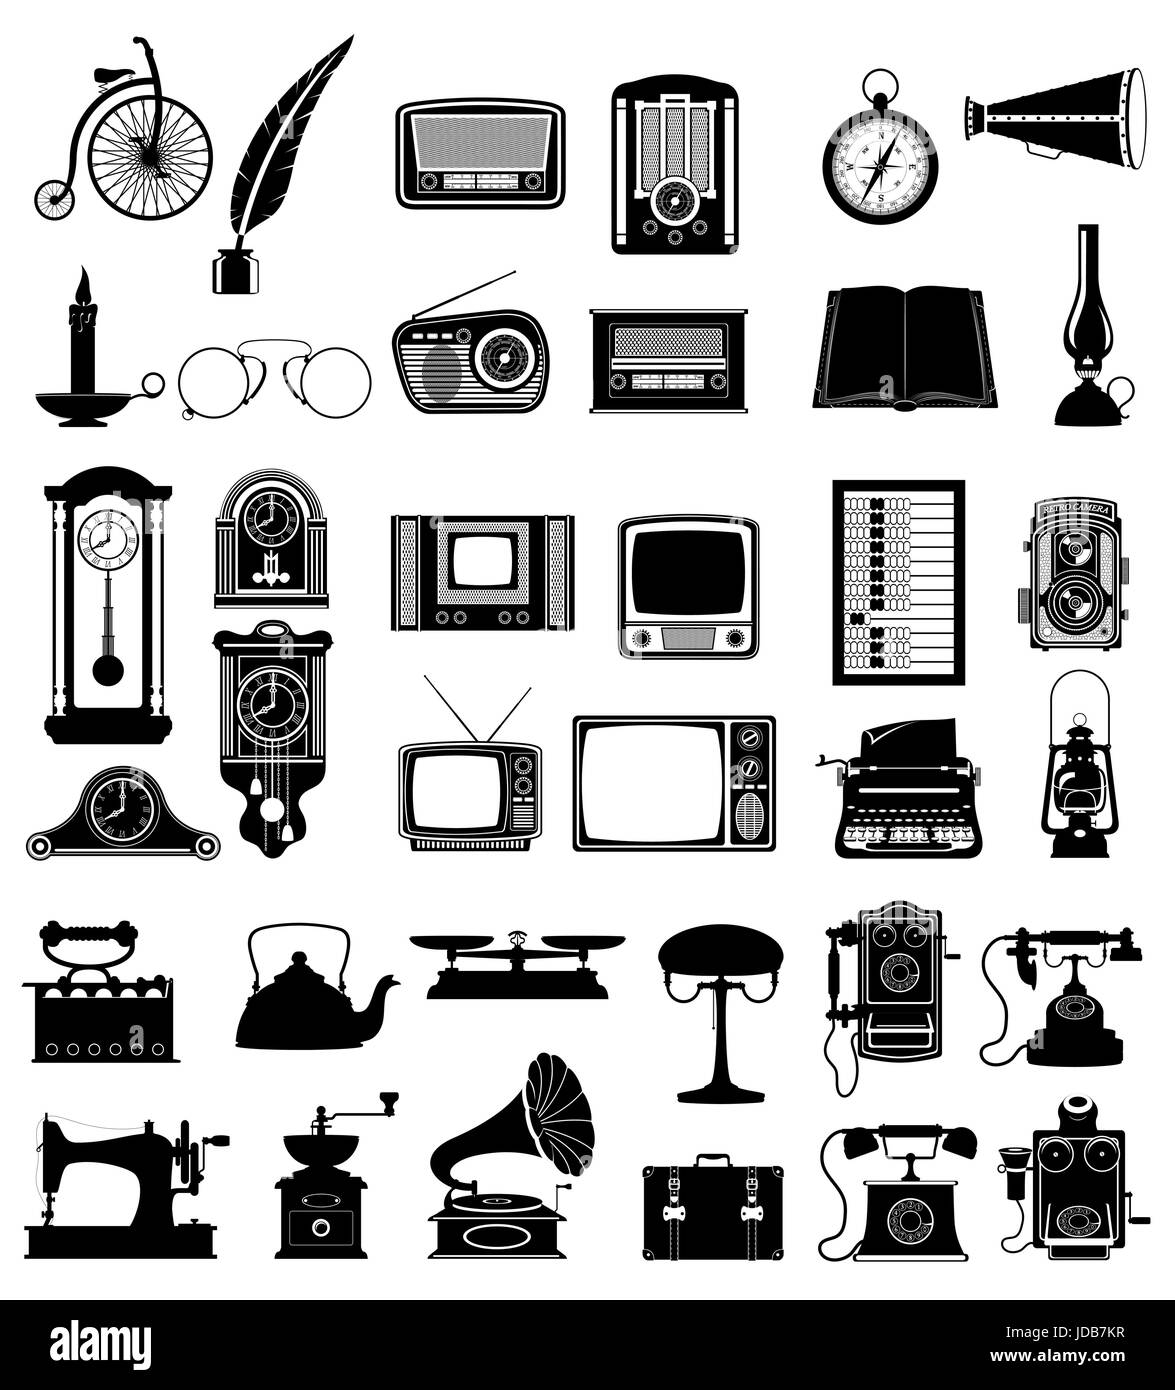 big set of much objects retro old vintage icons stock vector illustration isolated on white background Stock Vector